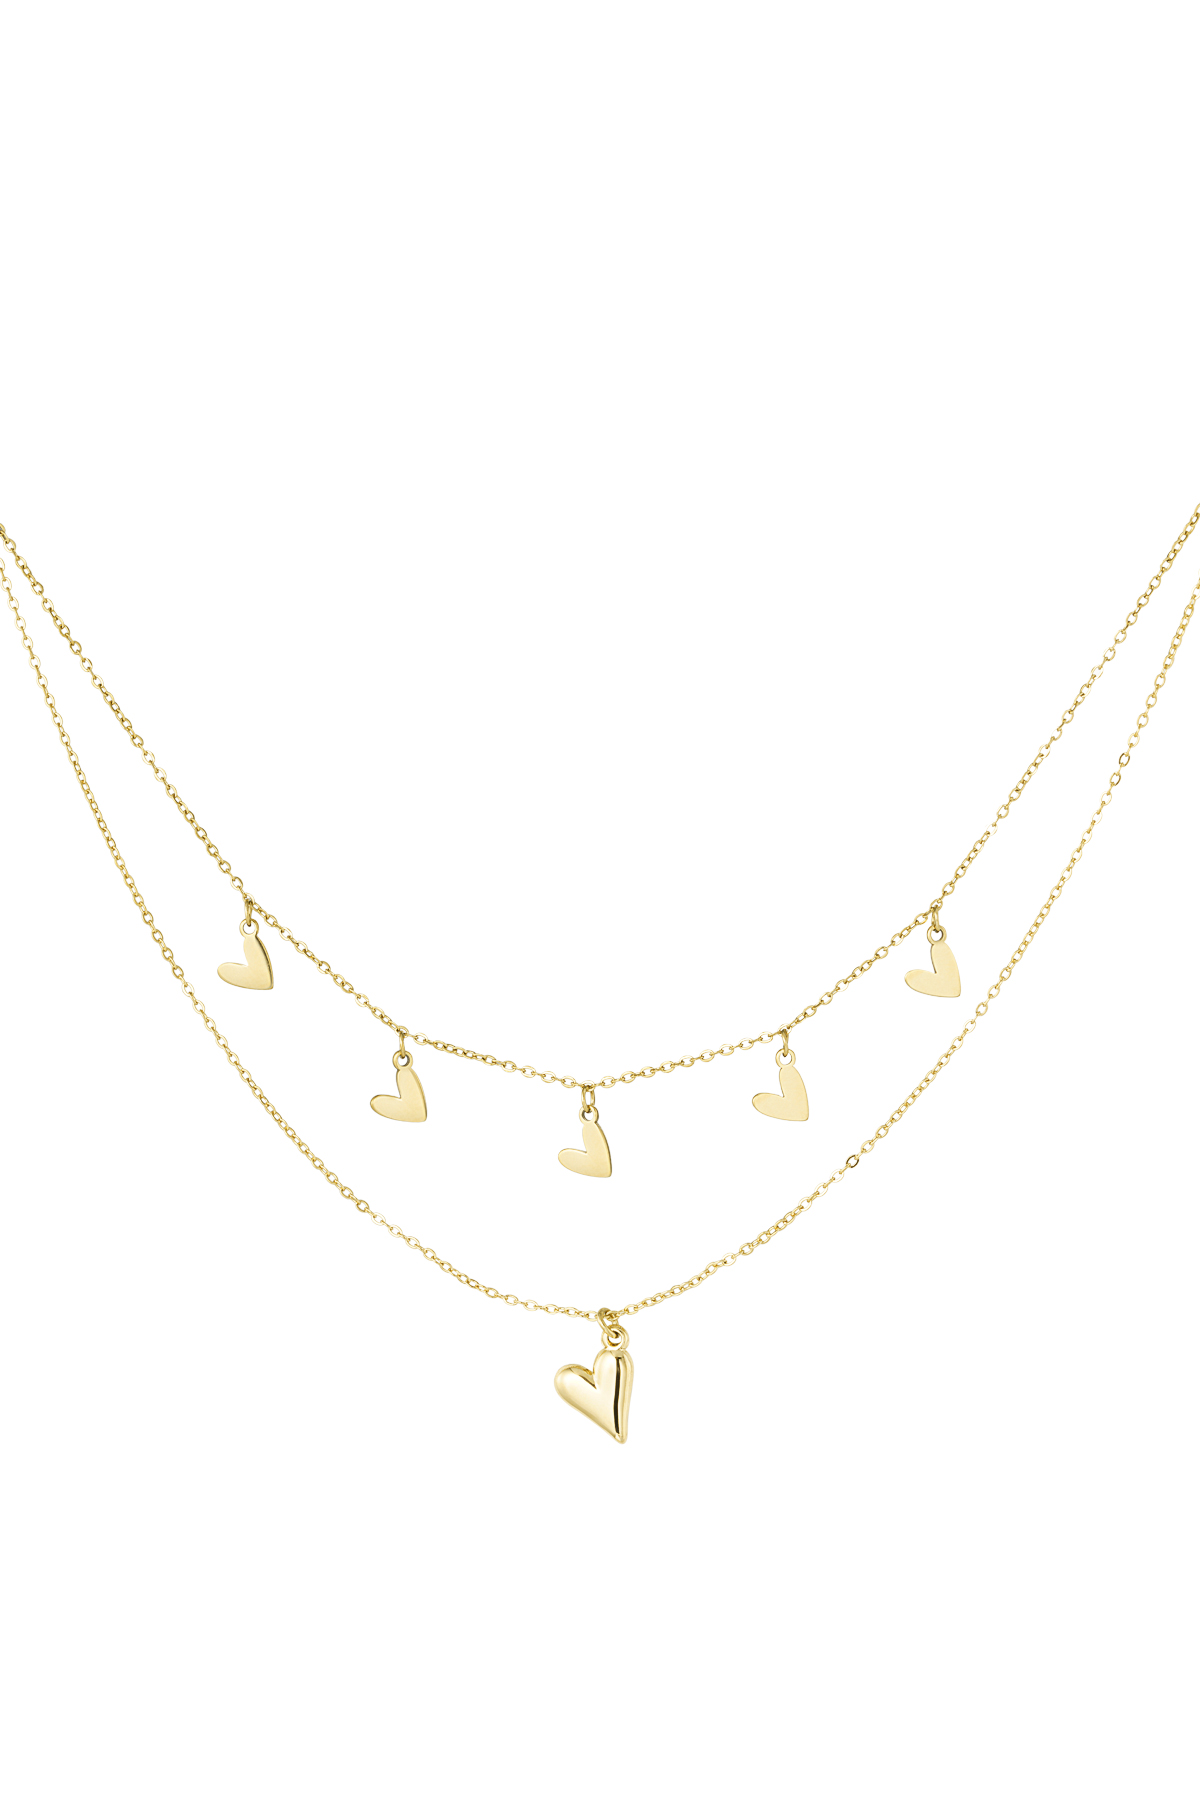 Double heart necklace - gold h5 